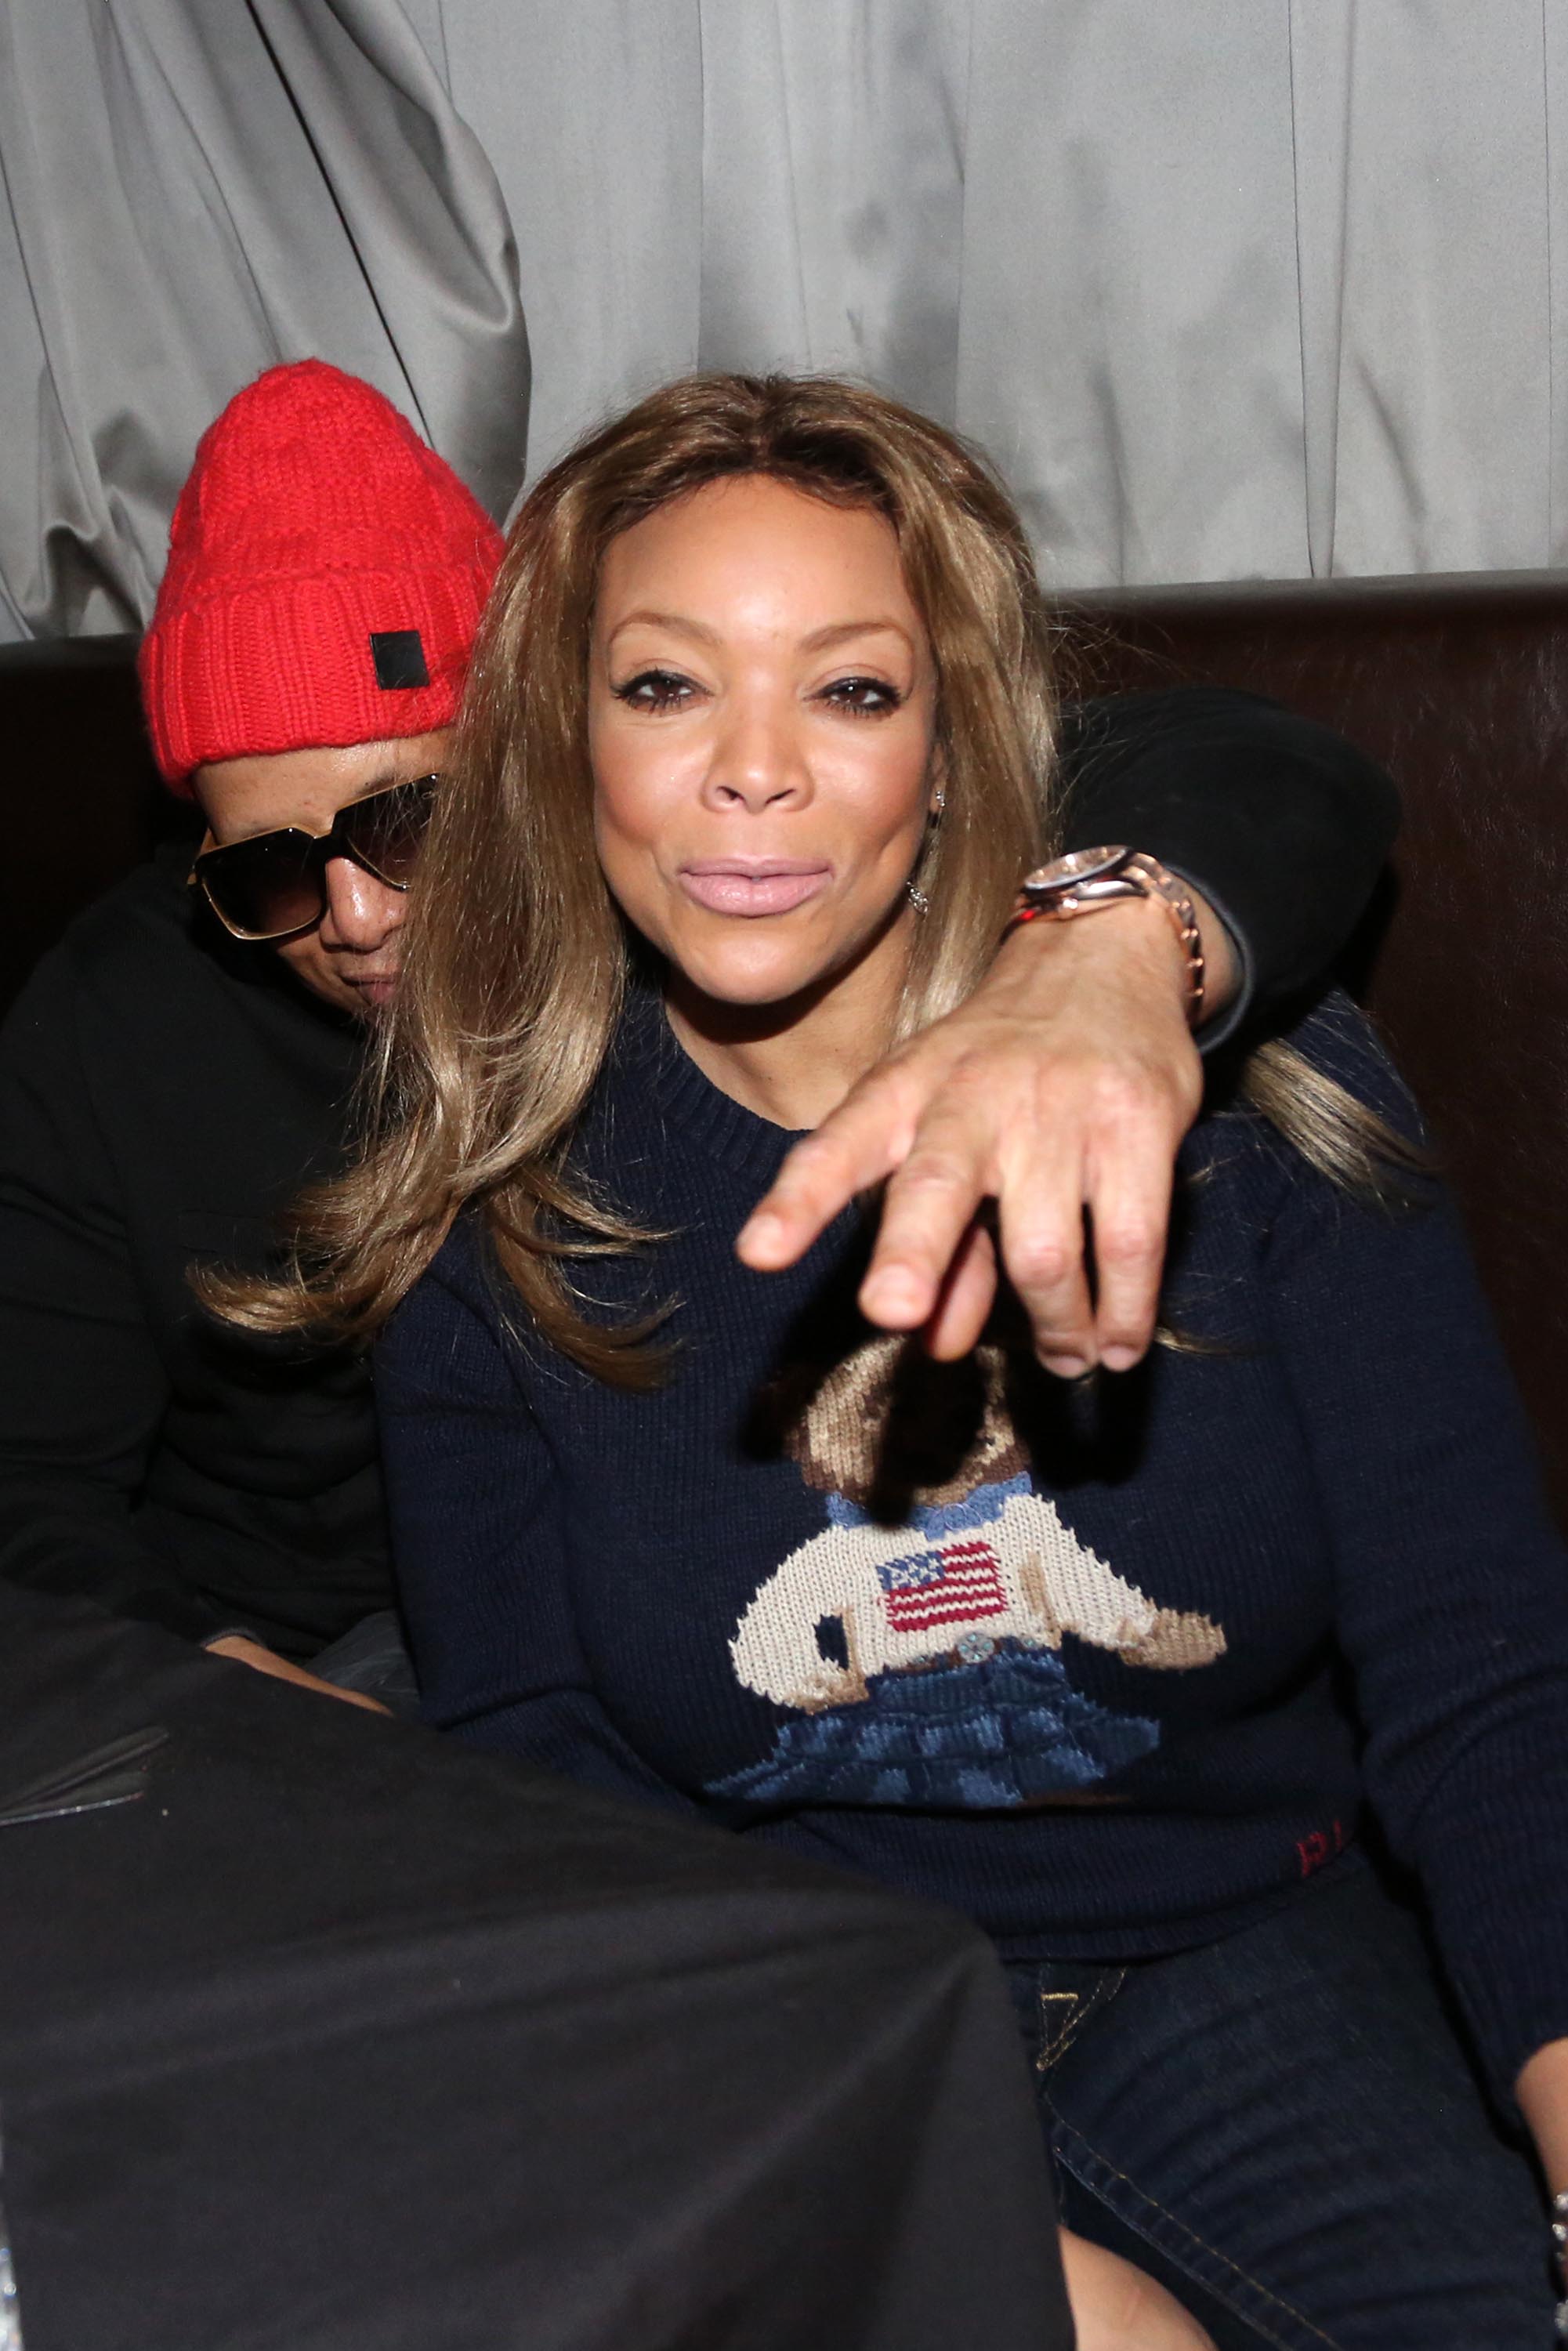 TV personality Wendy Williams (r) and husband Kevin Hunter attend the Smif N Wessun - Dah Shinin' 20 Year Anniversary concert at S.O.B.'s on January 14, 2015 in New York City.